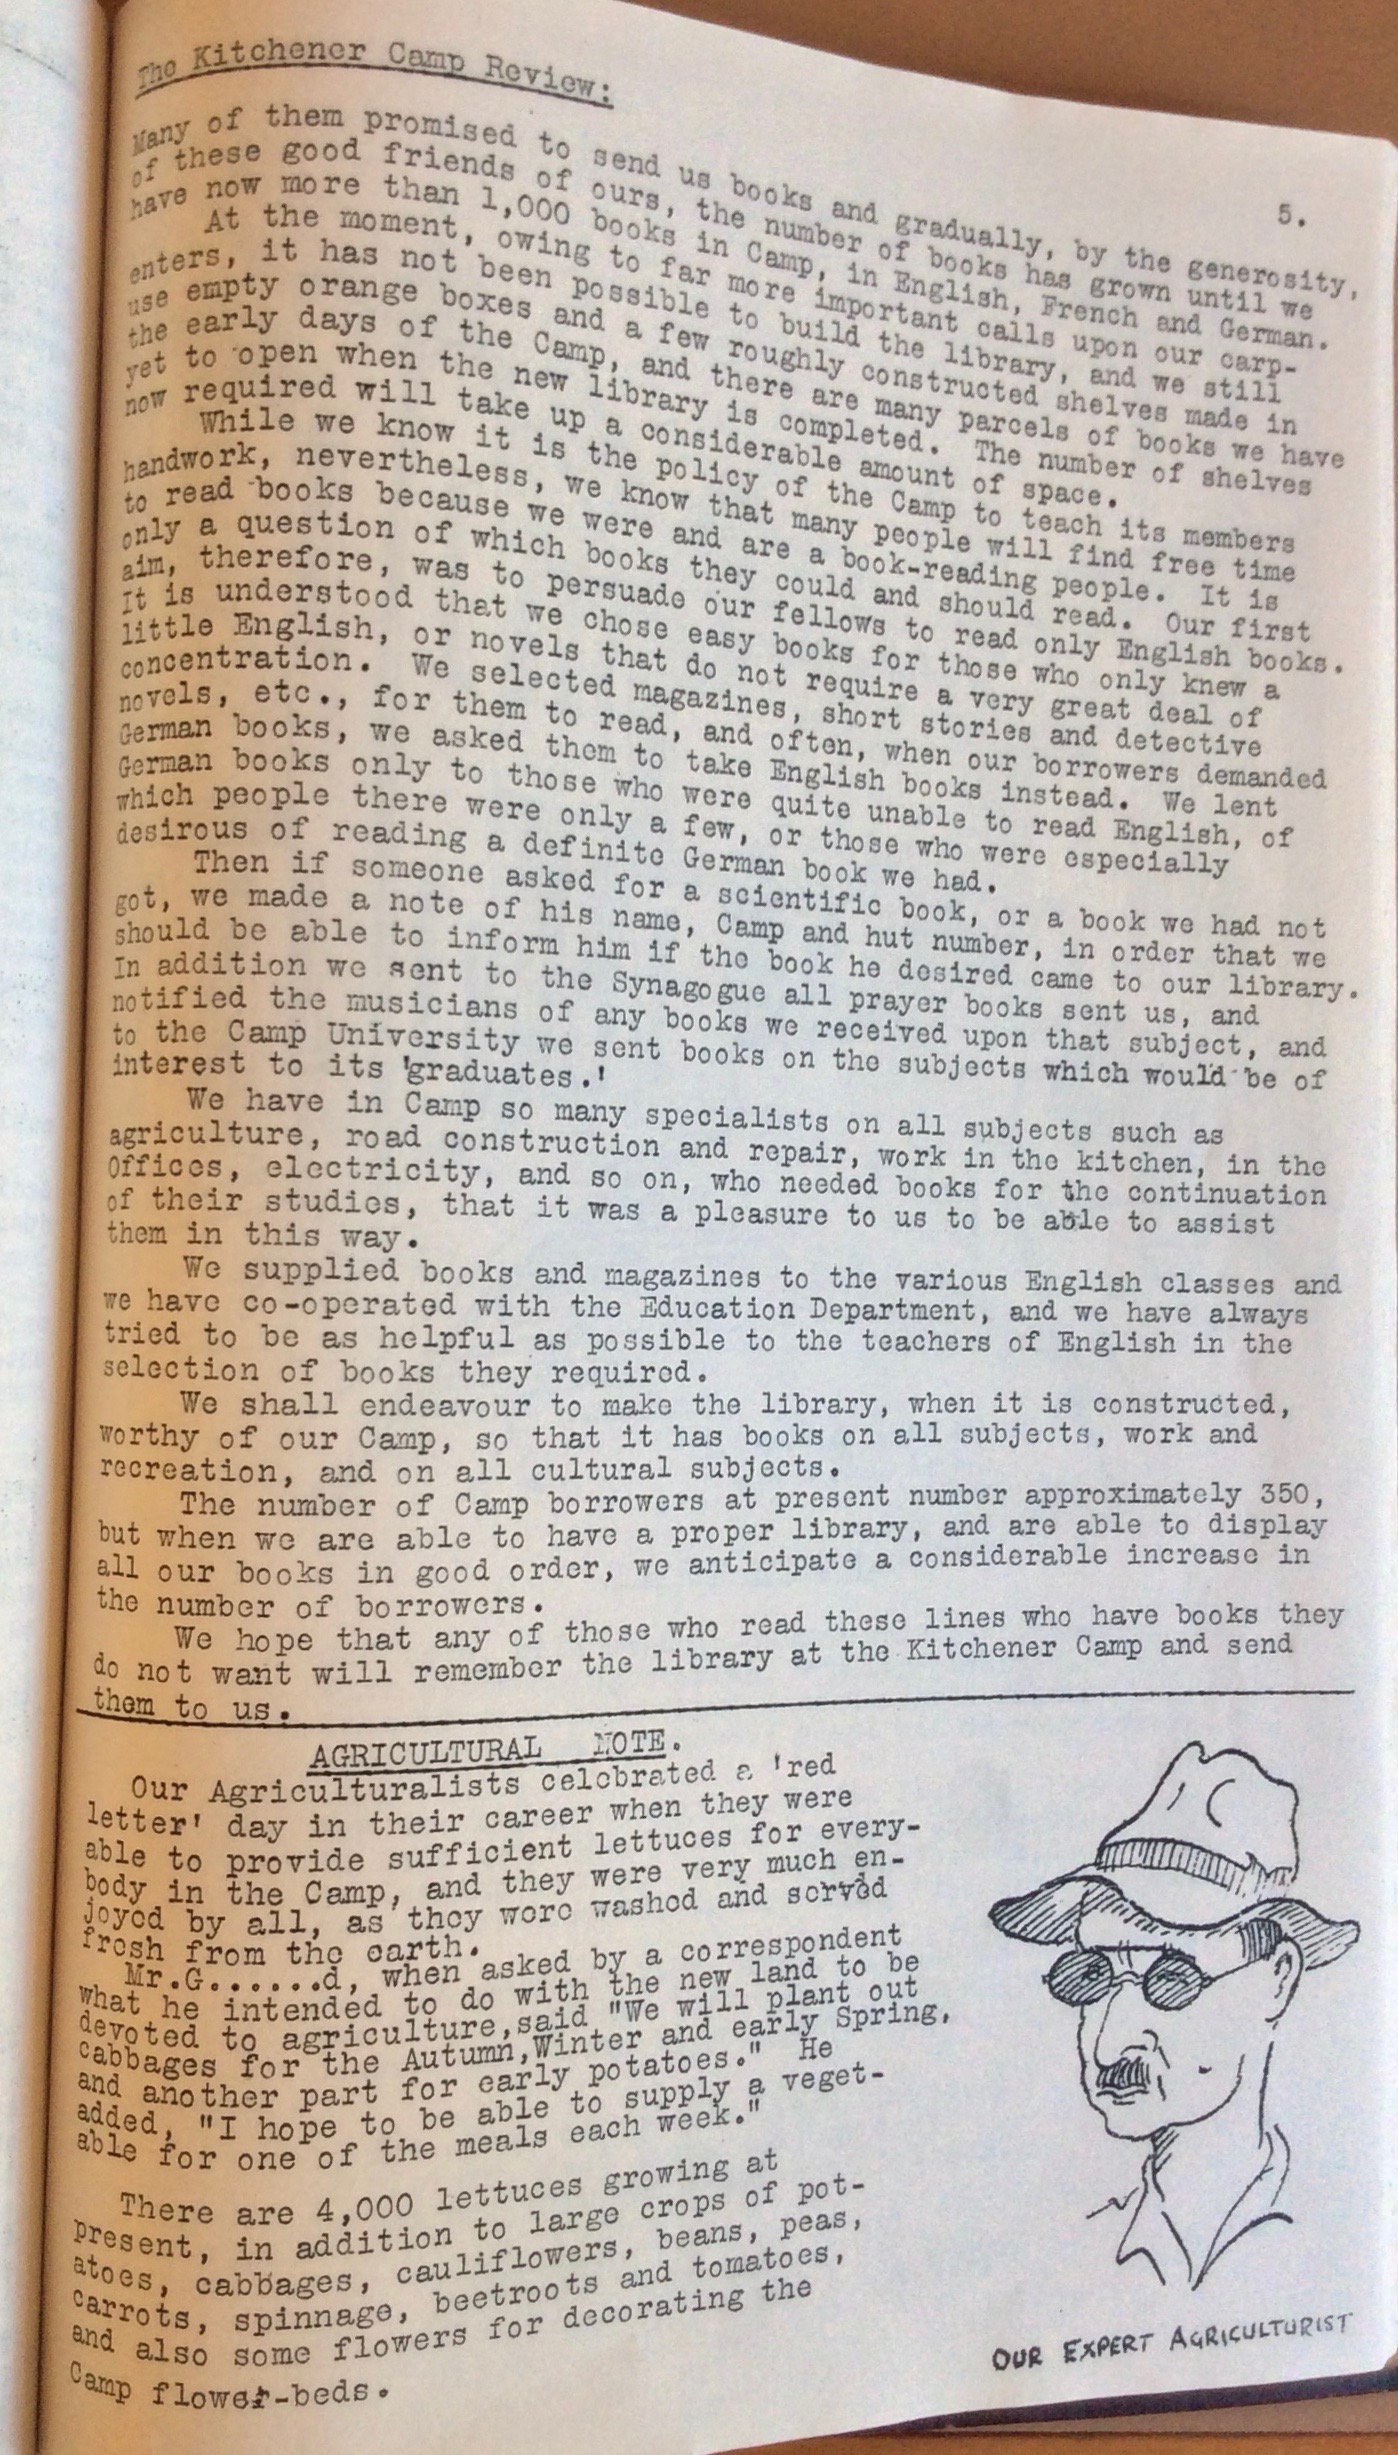 The Kitchener Camp Review, August 1939, page 5